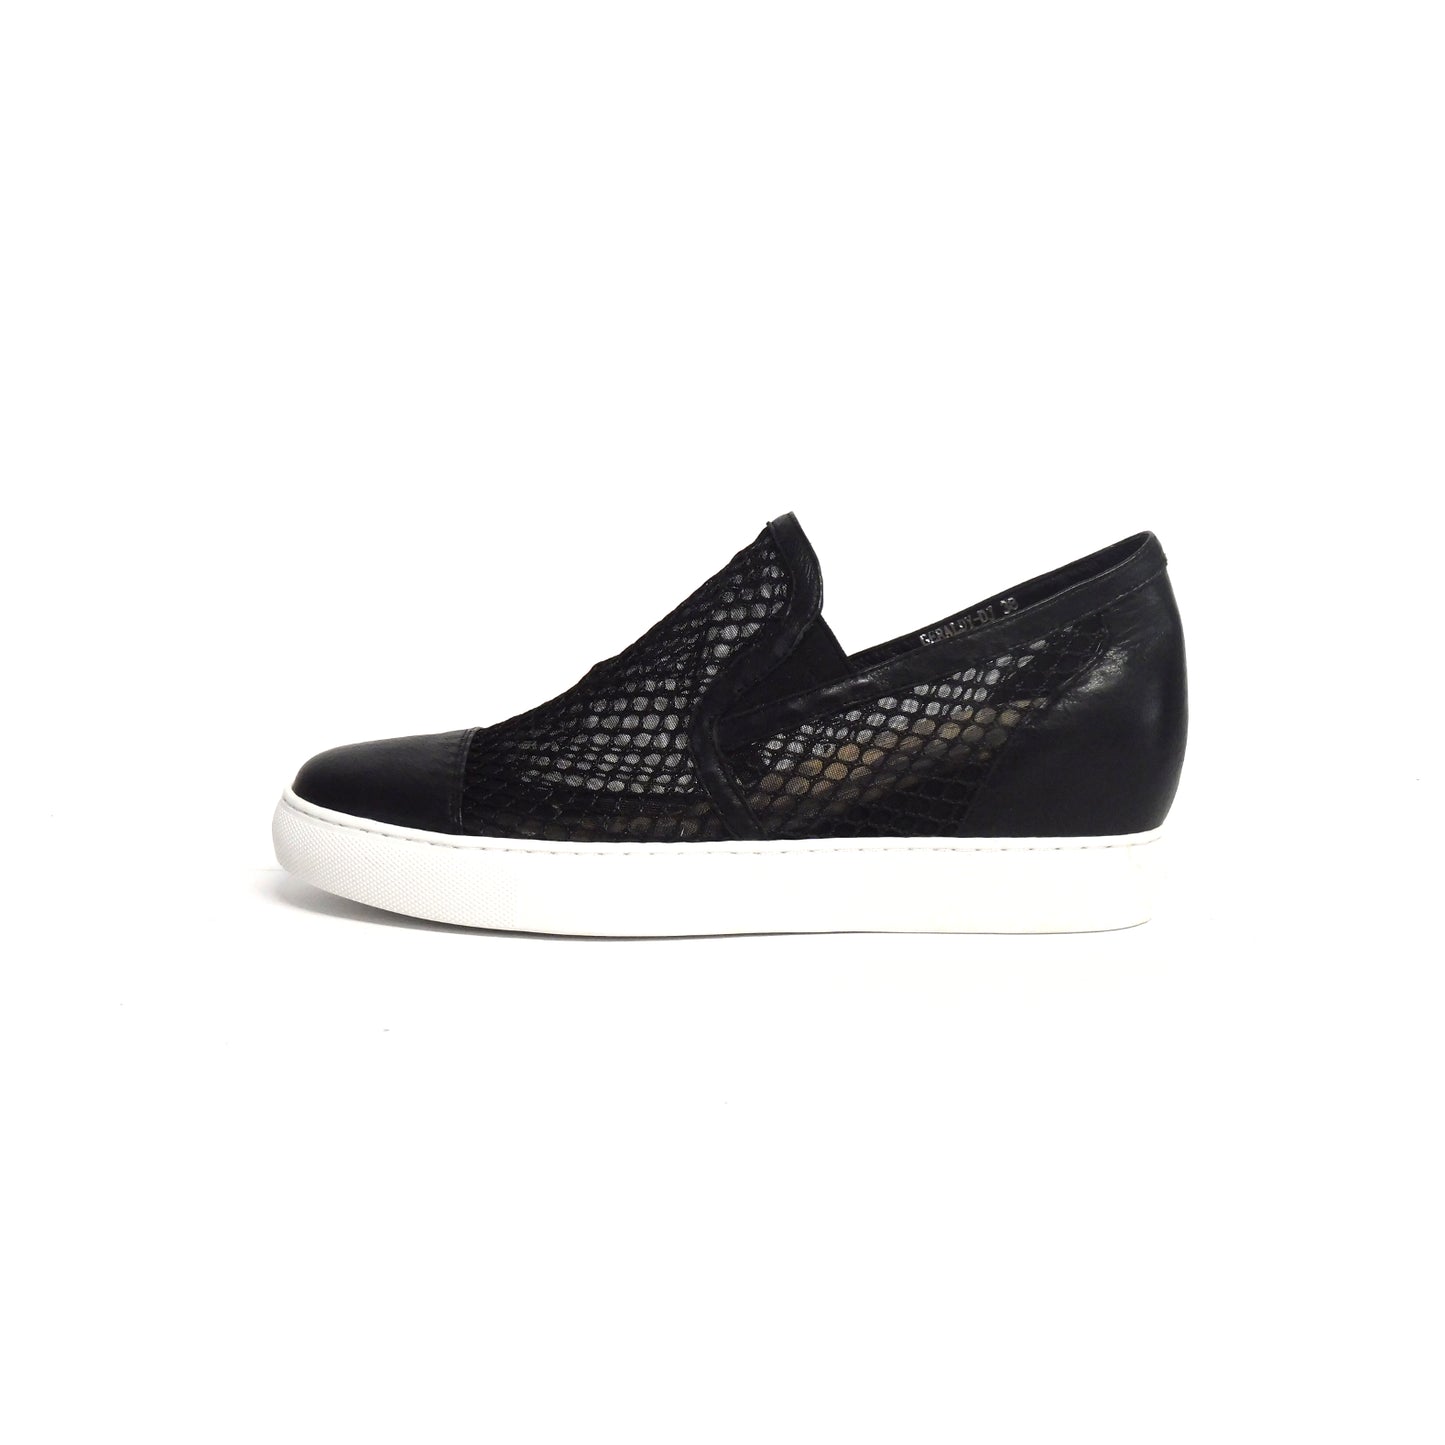 Geraldy Black/Mesh (size 41) ONLINE ONLY